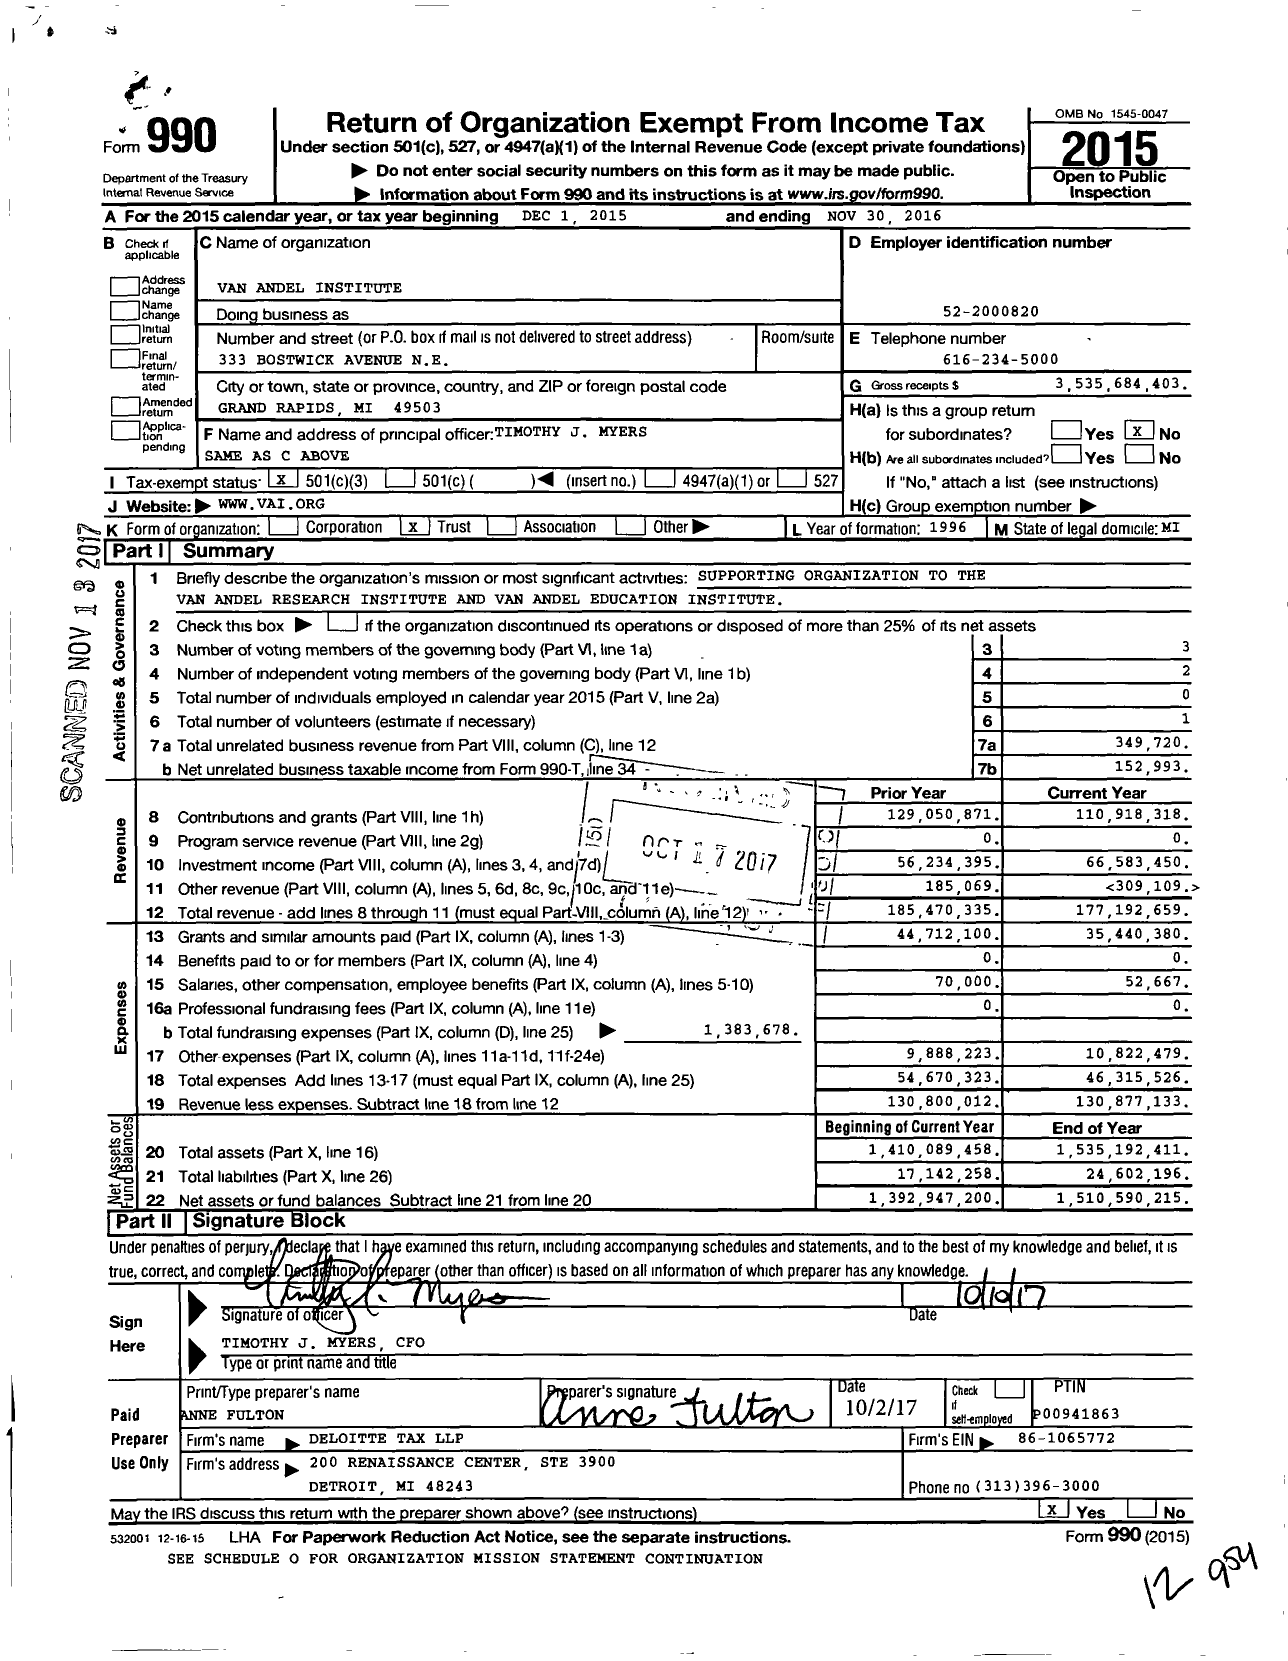 Image of first page of 2015 Form 990 for Van Andel Institute